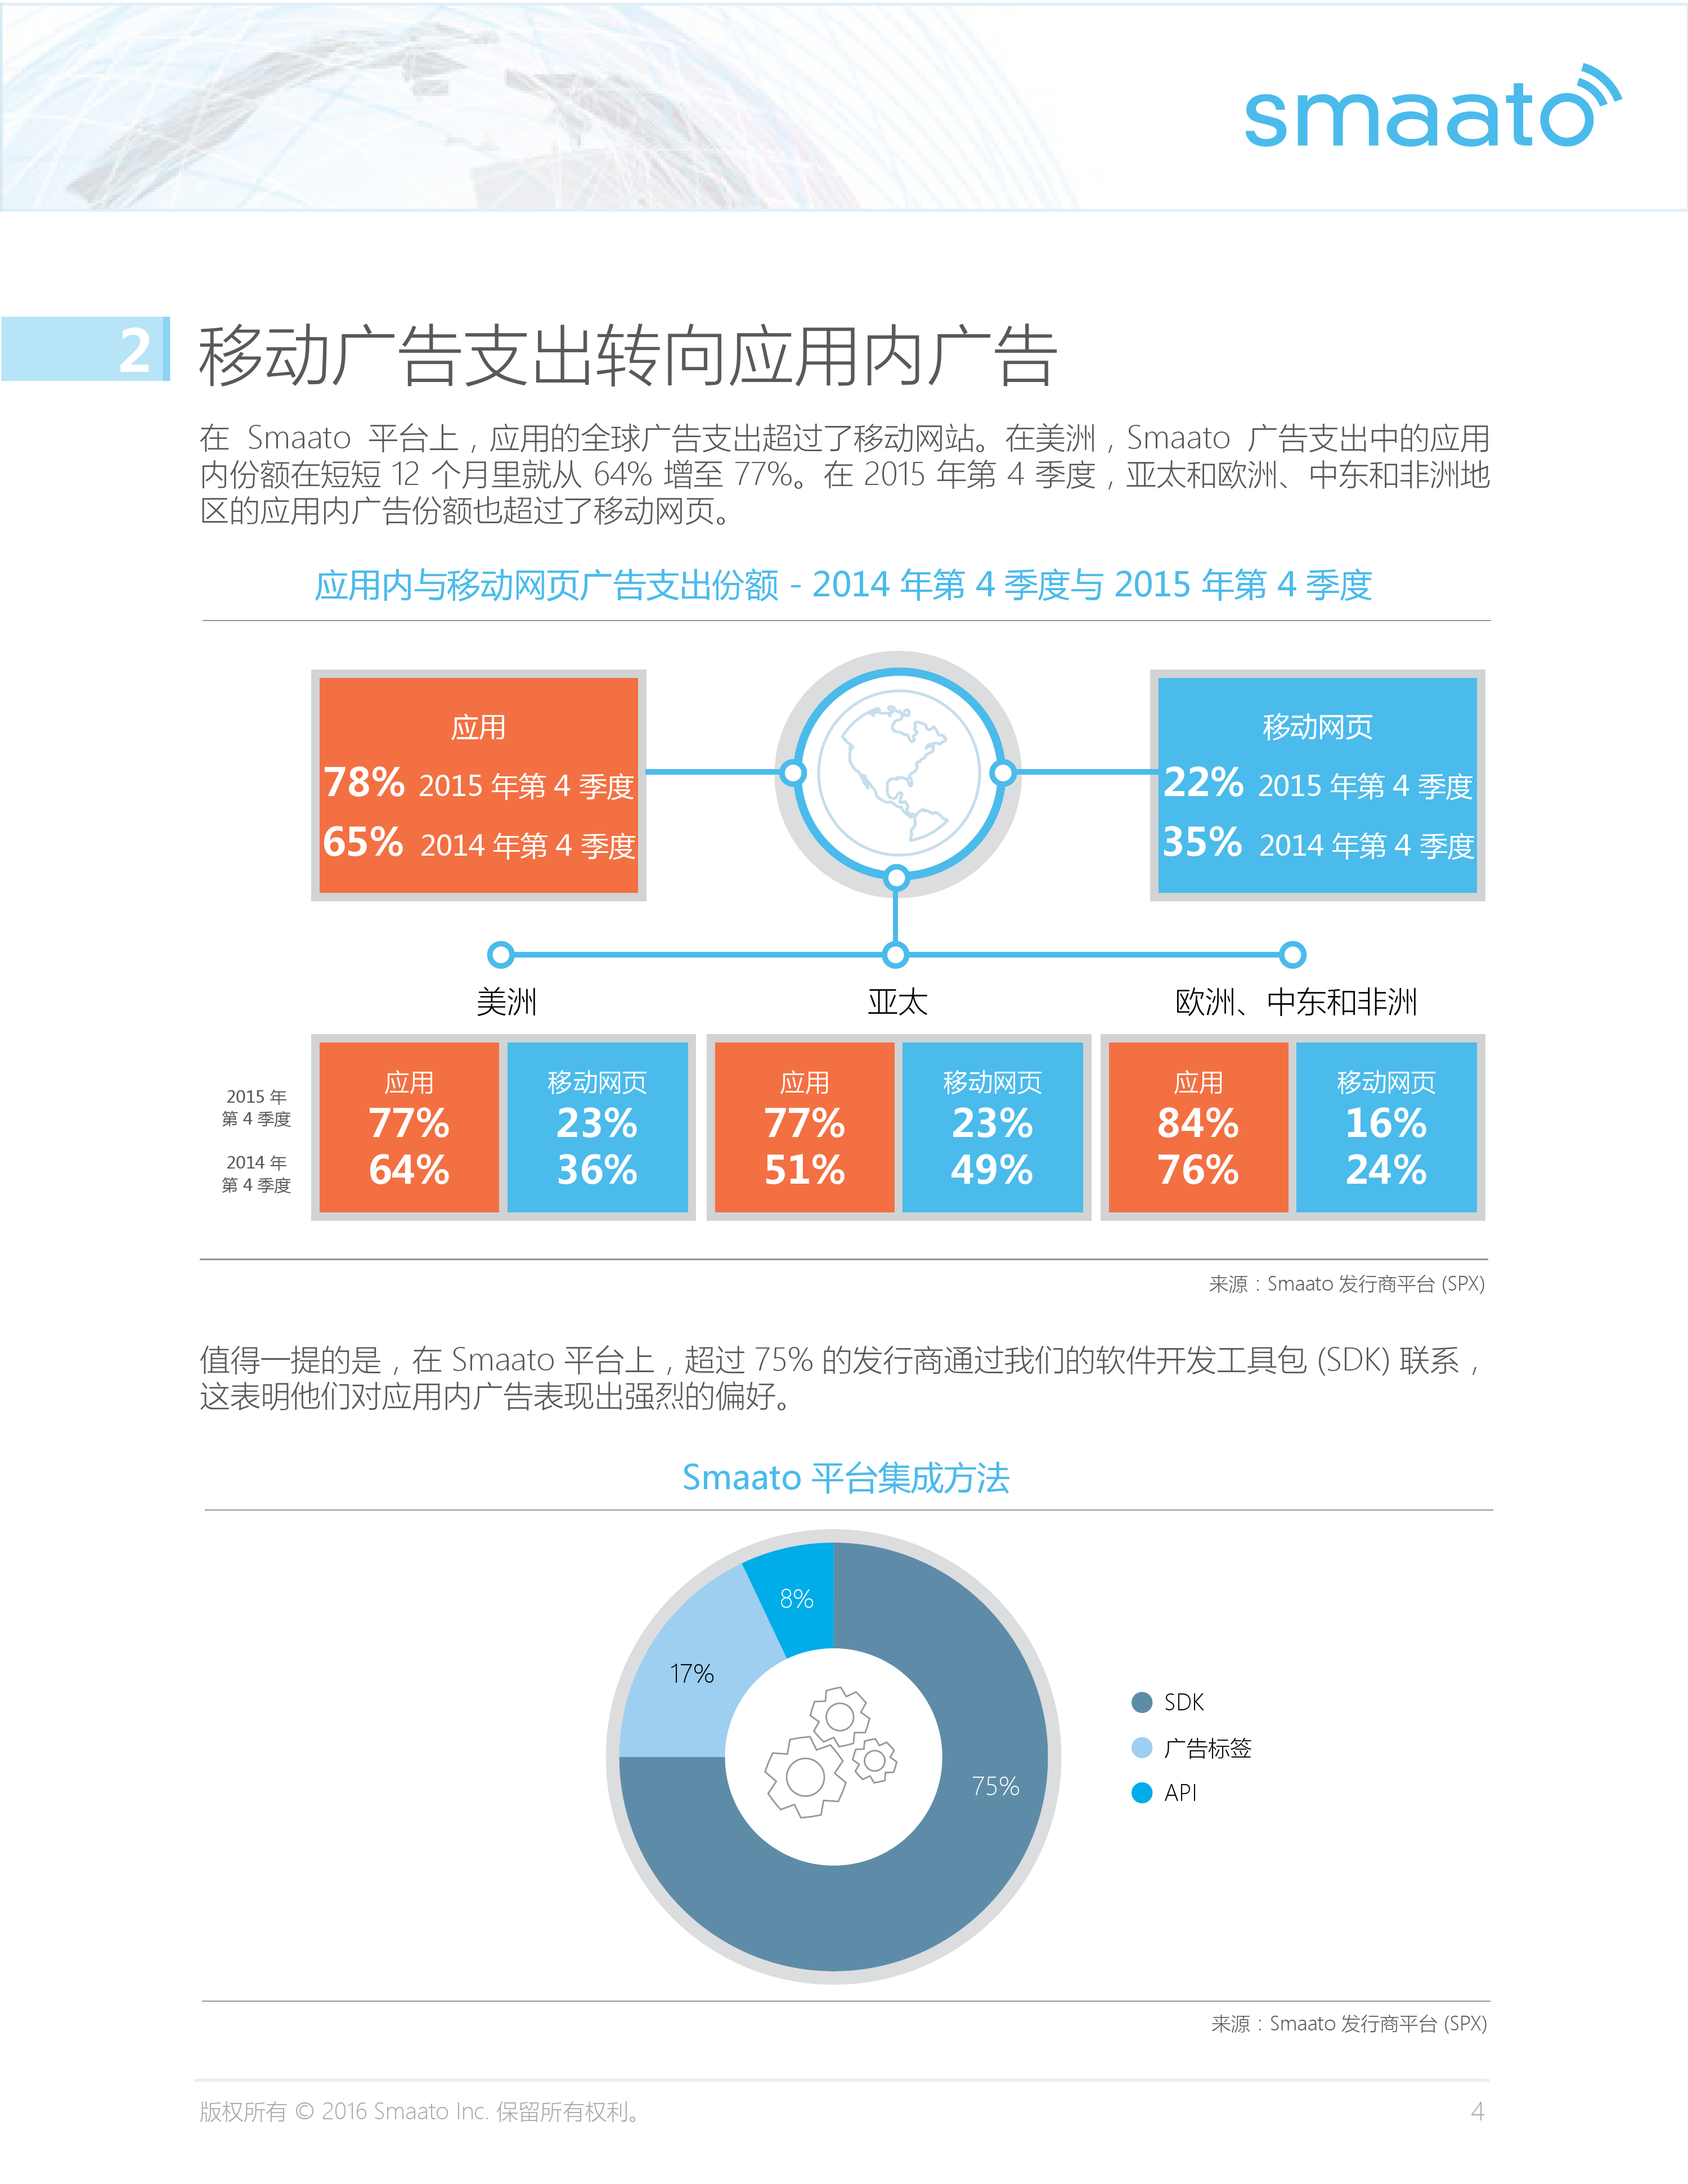 Smaato_Global_Trends_in_Mobile_Advertising_Report_Q4_2015_CN_000005